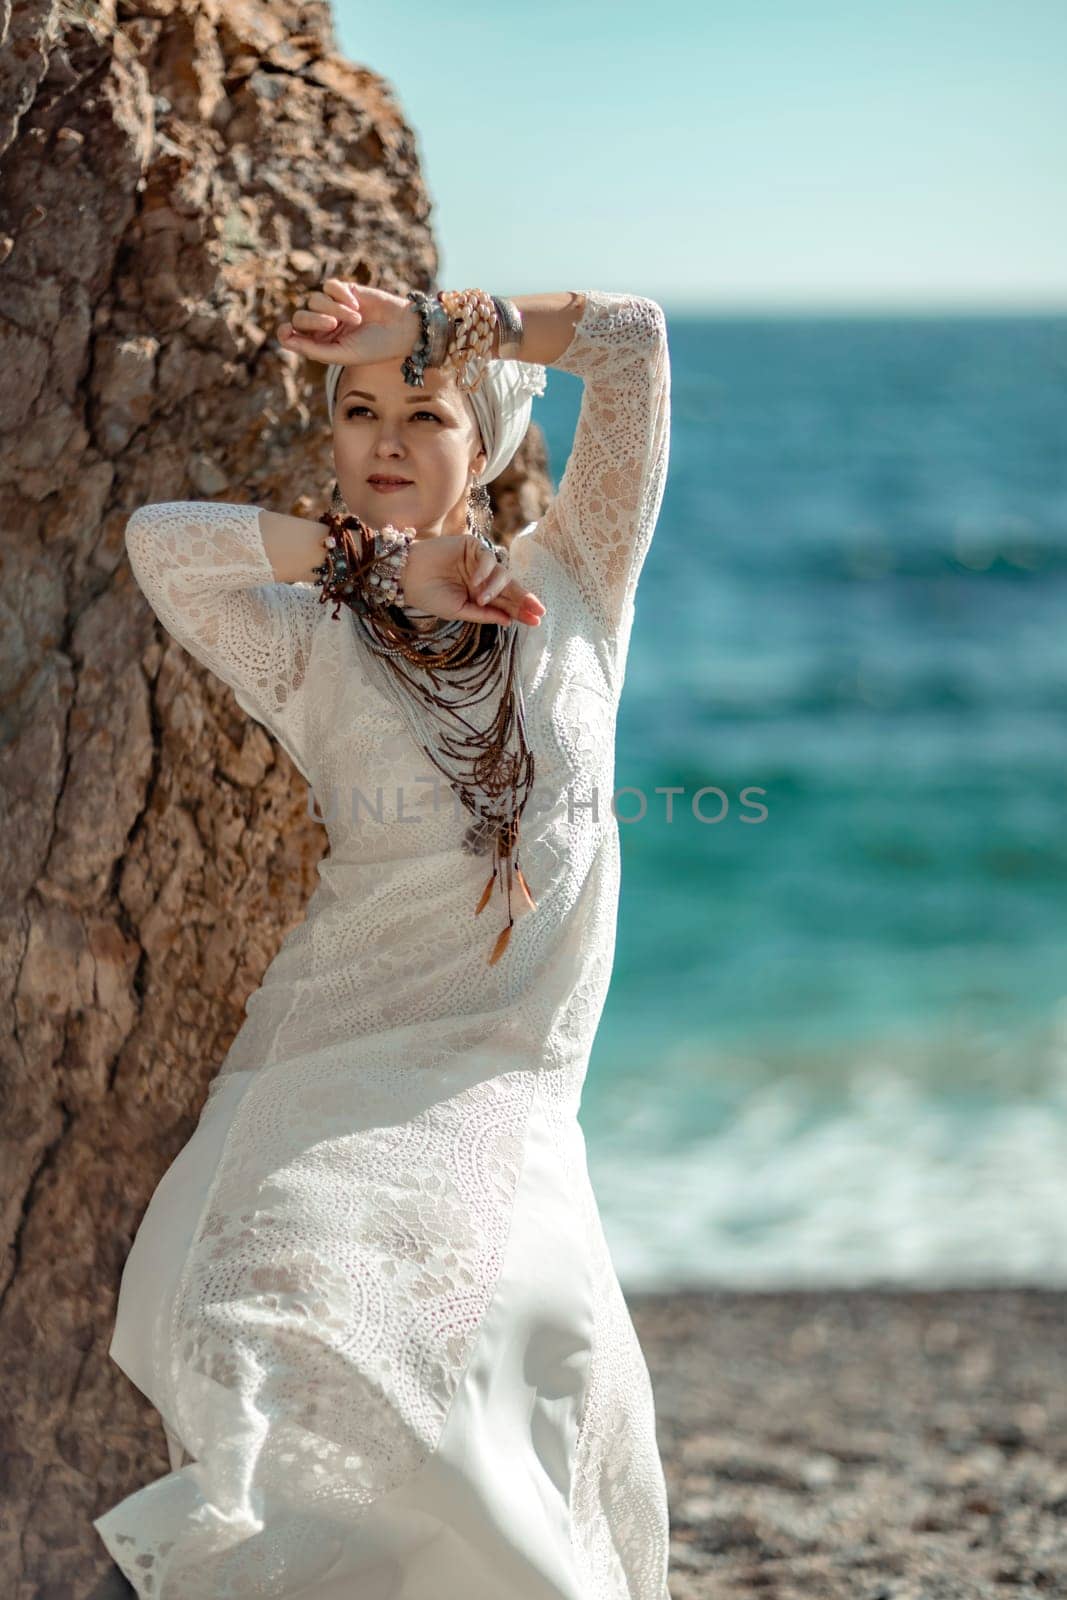 Woman white dress sea stones rocks.Middle-aged woman looks good with blond hair, boho style in a white long dress on beach jewelry around her neck and arms. by Matiunina